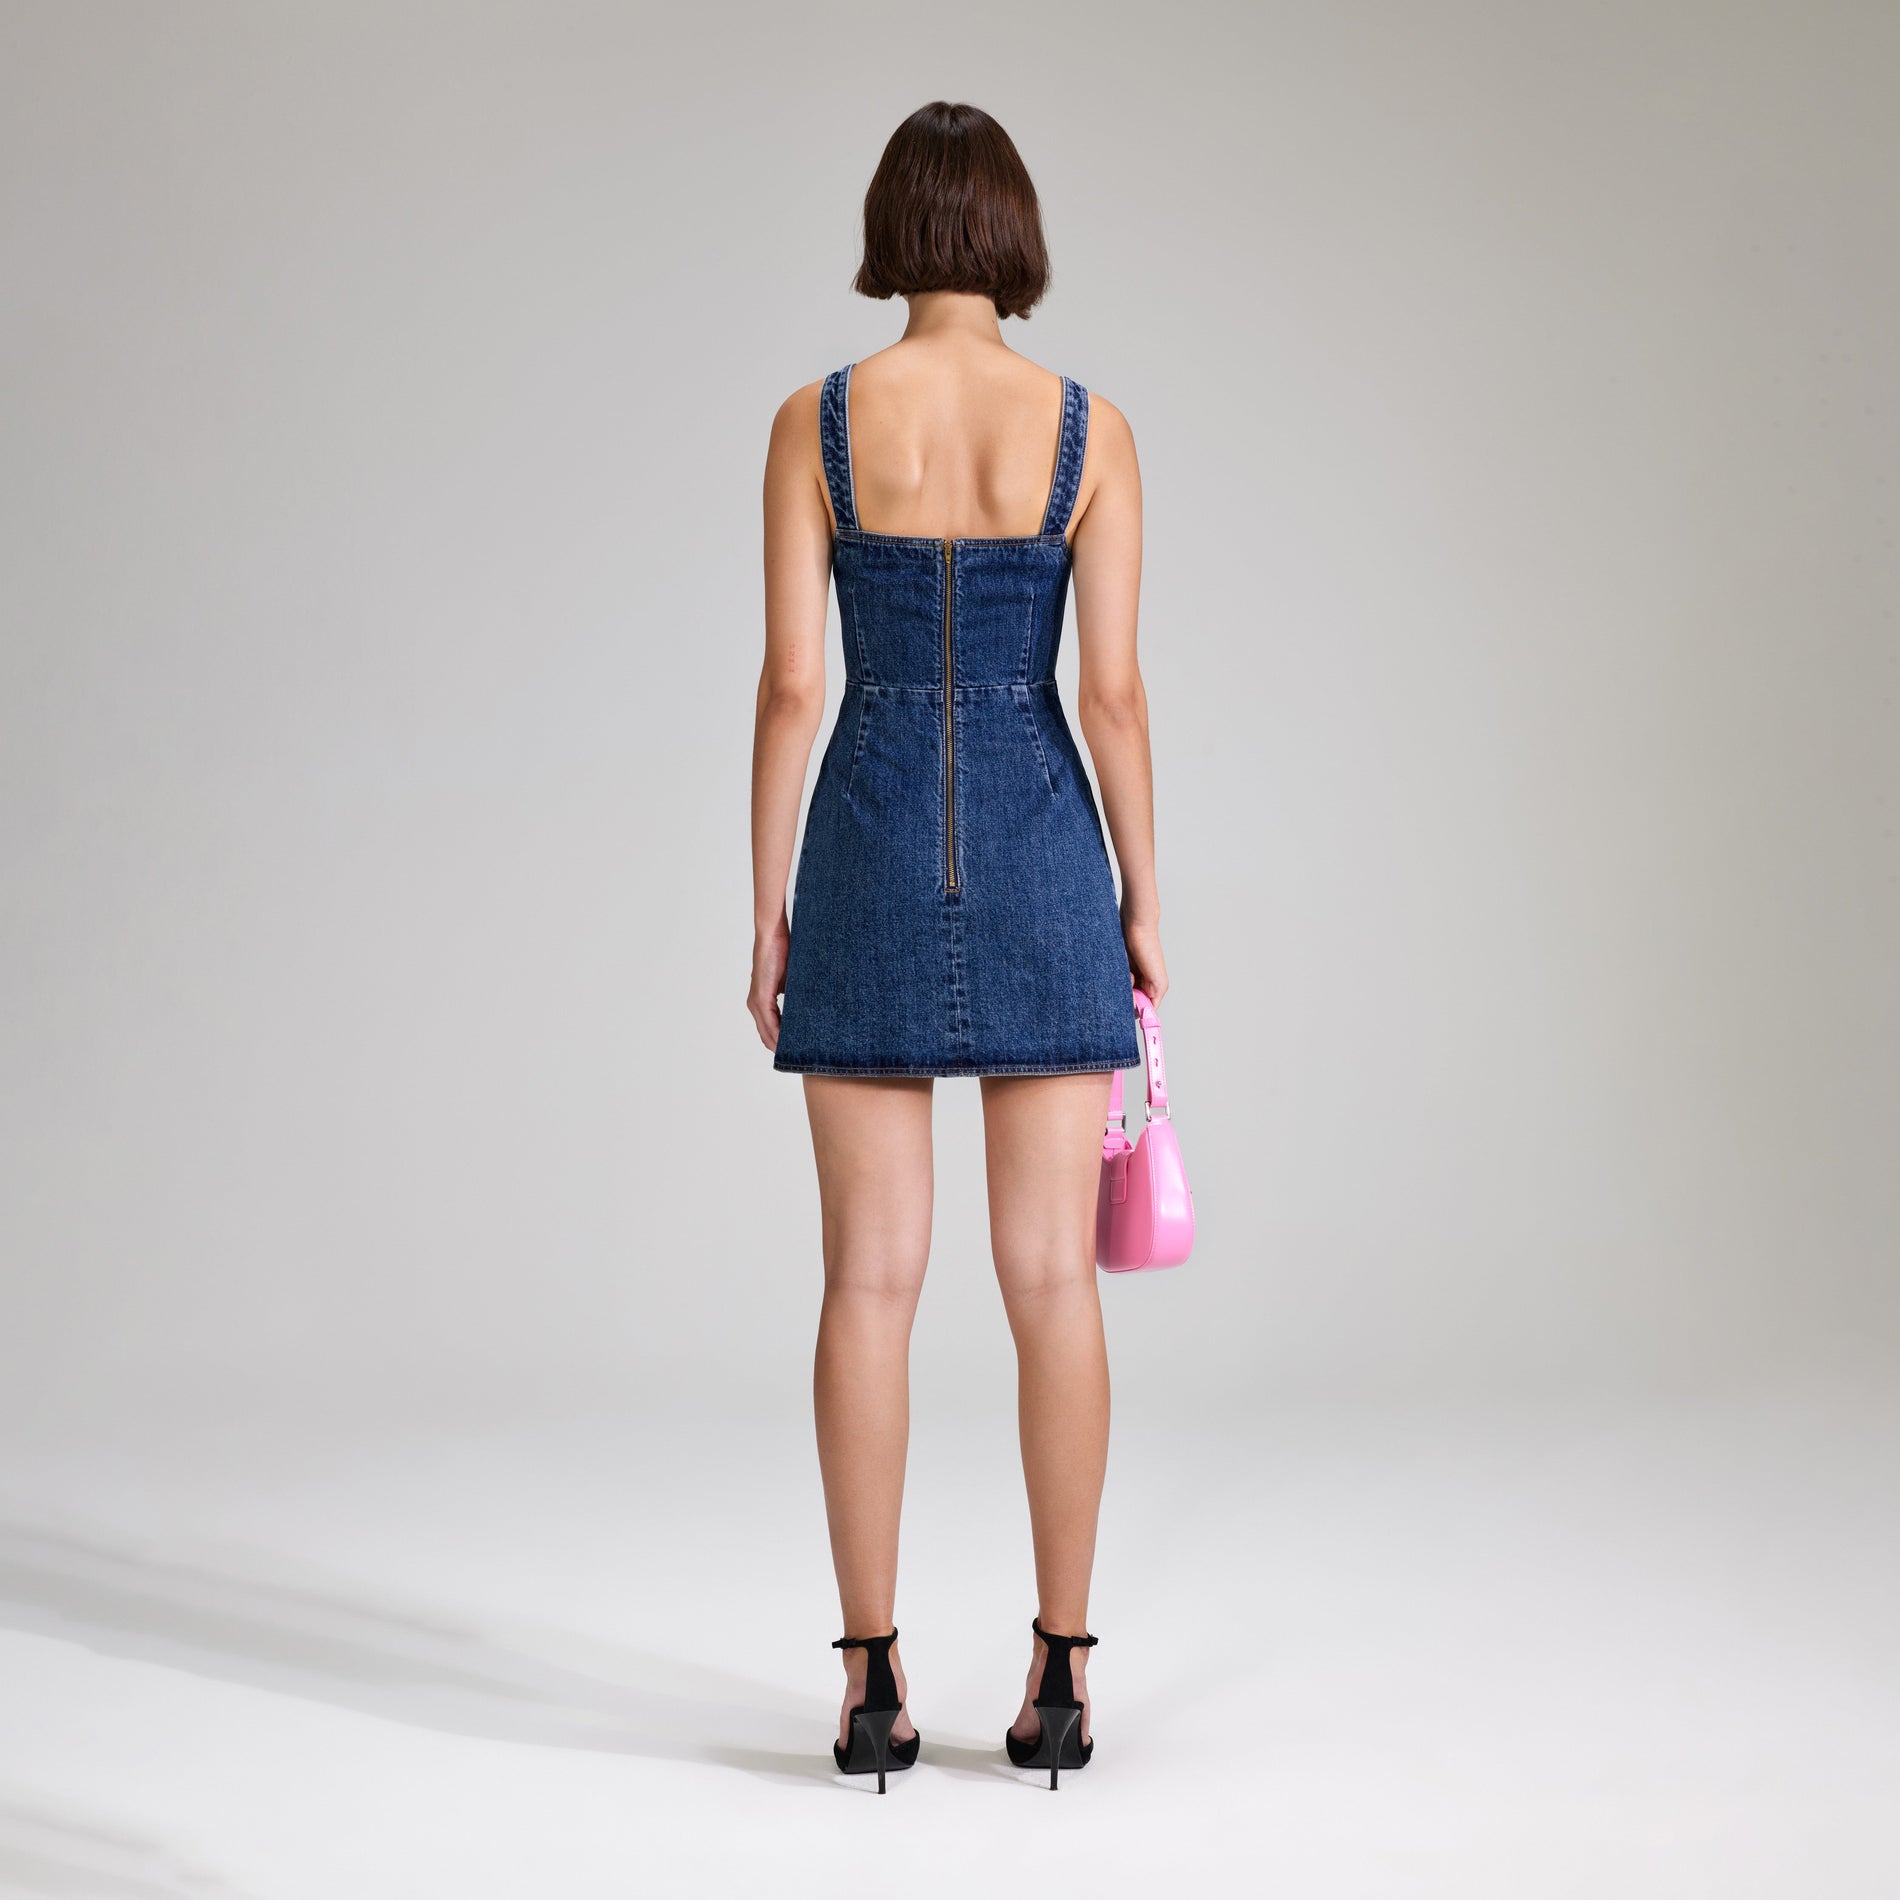 A woman wearing the Denim Mini Dress With Bows